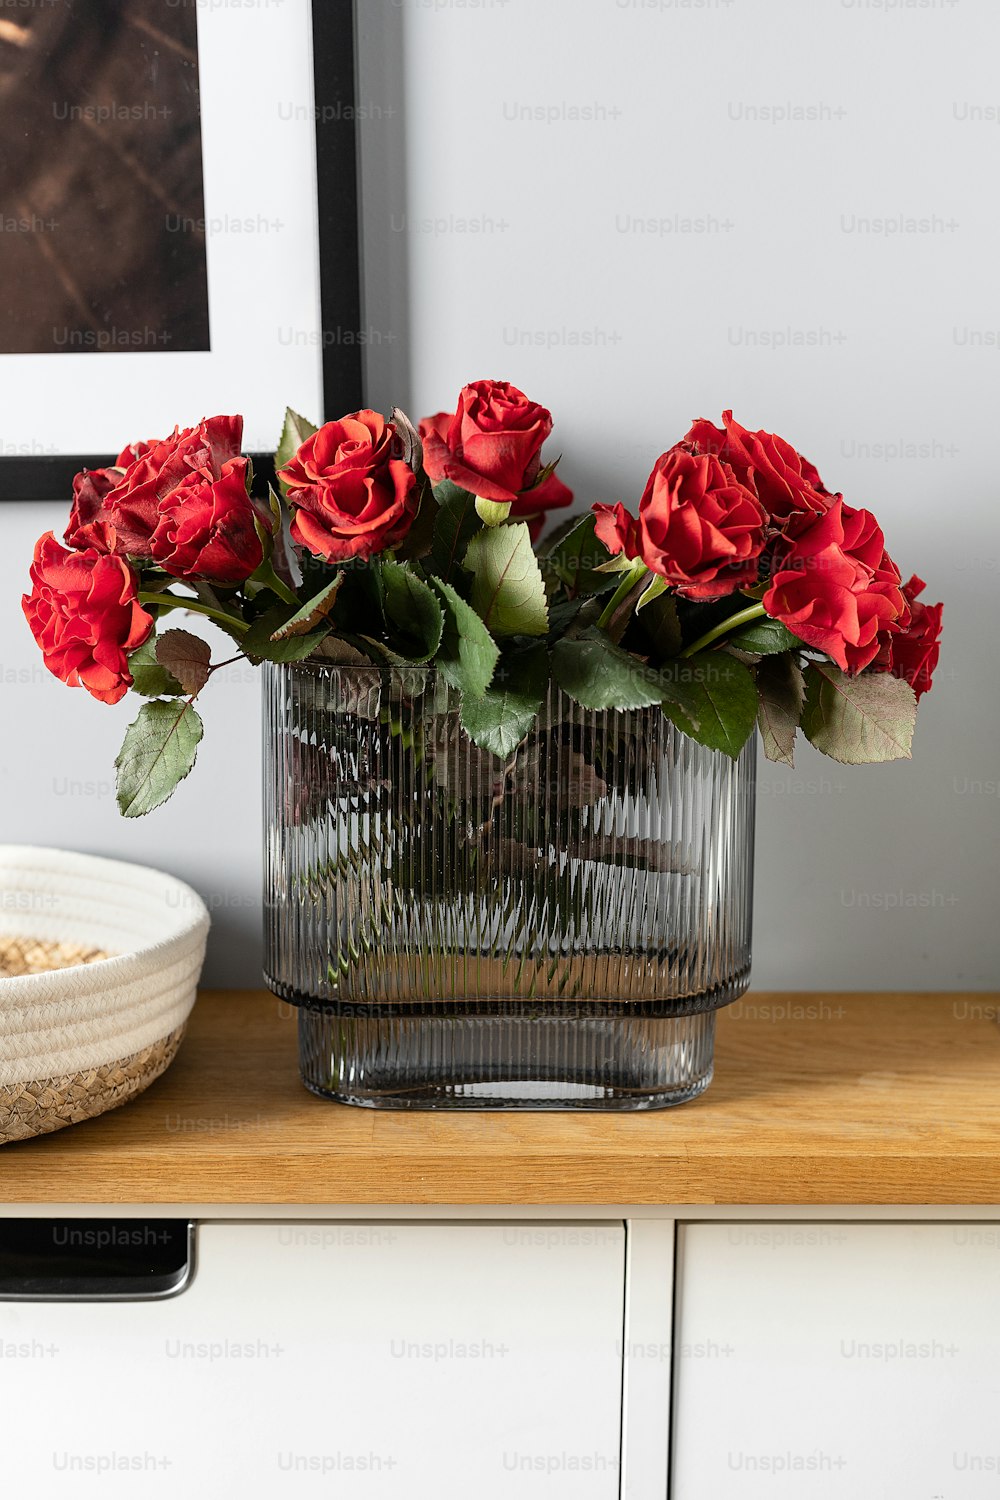 a glass vase filled with red roses on top of a wooden table